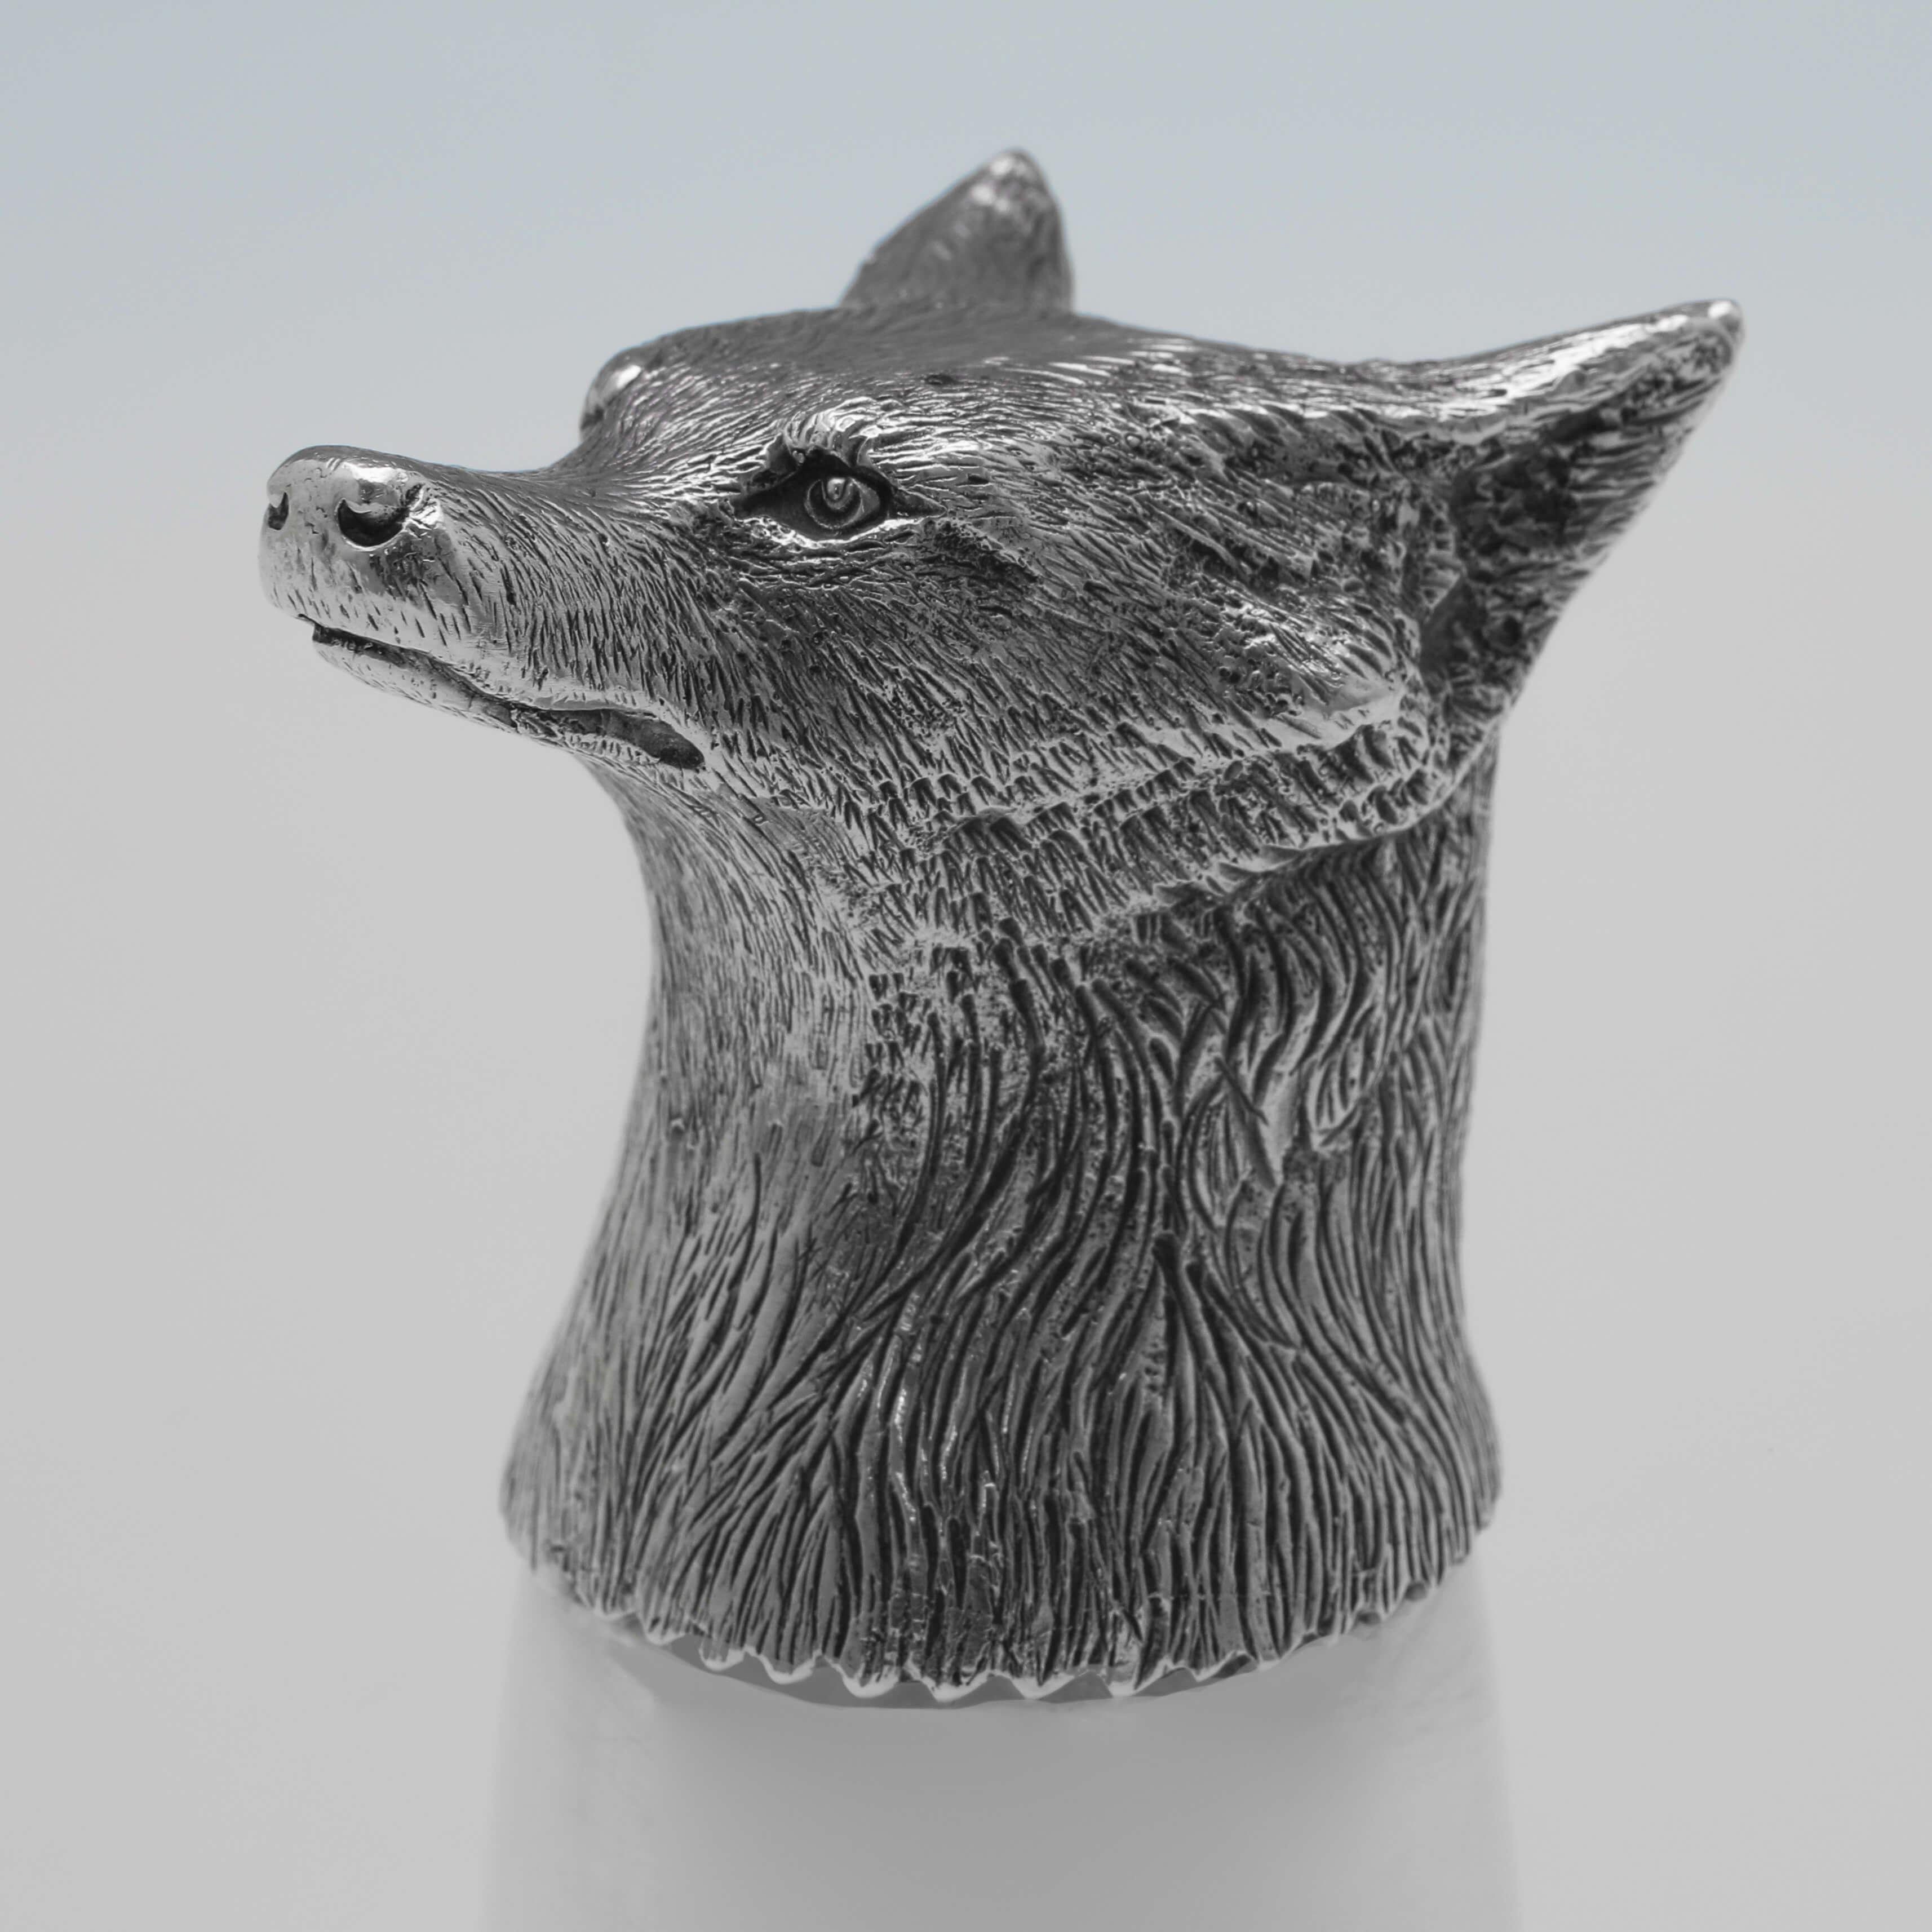 Late 20th Century Pair of Sterling Silver Stirrup Cups - Fox & Dog Head - Camelot Silverware 1995 For Sale